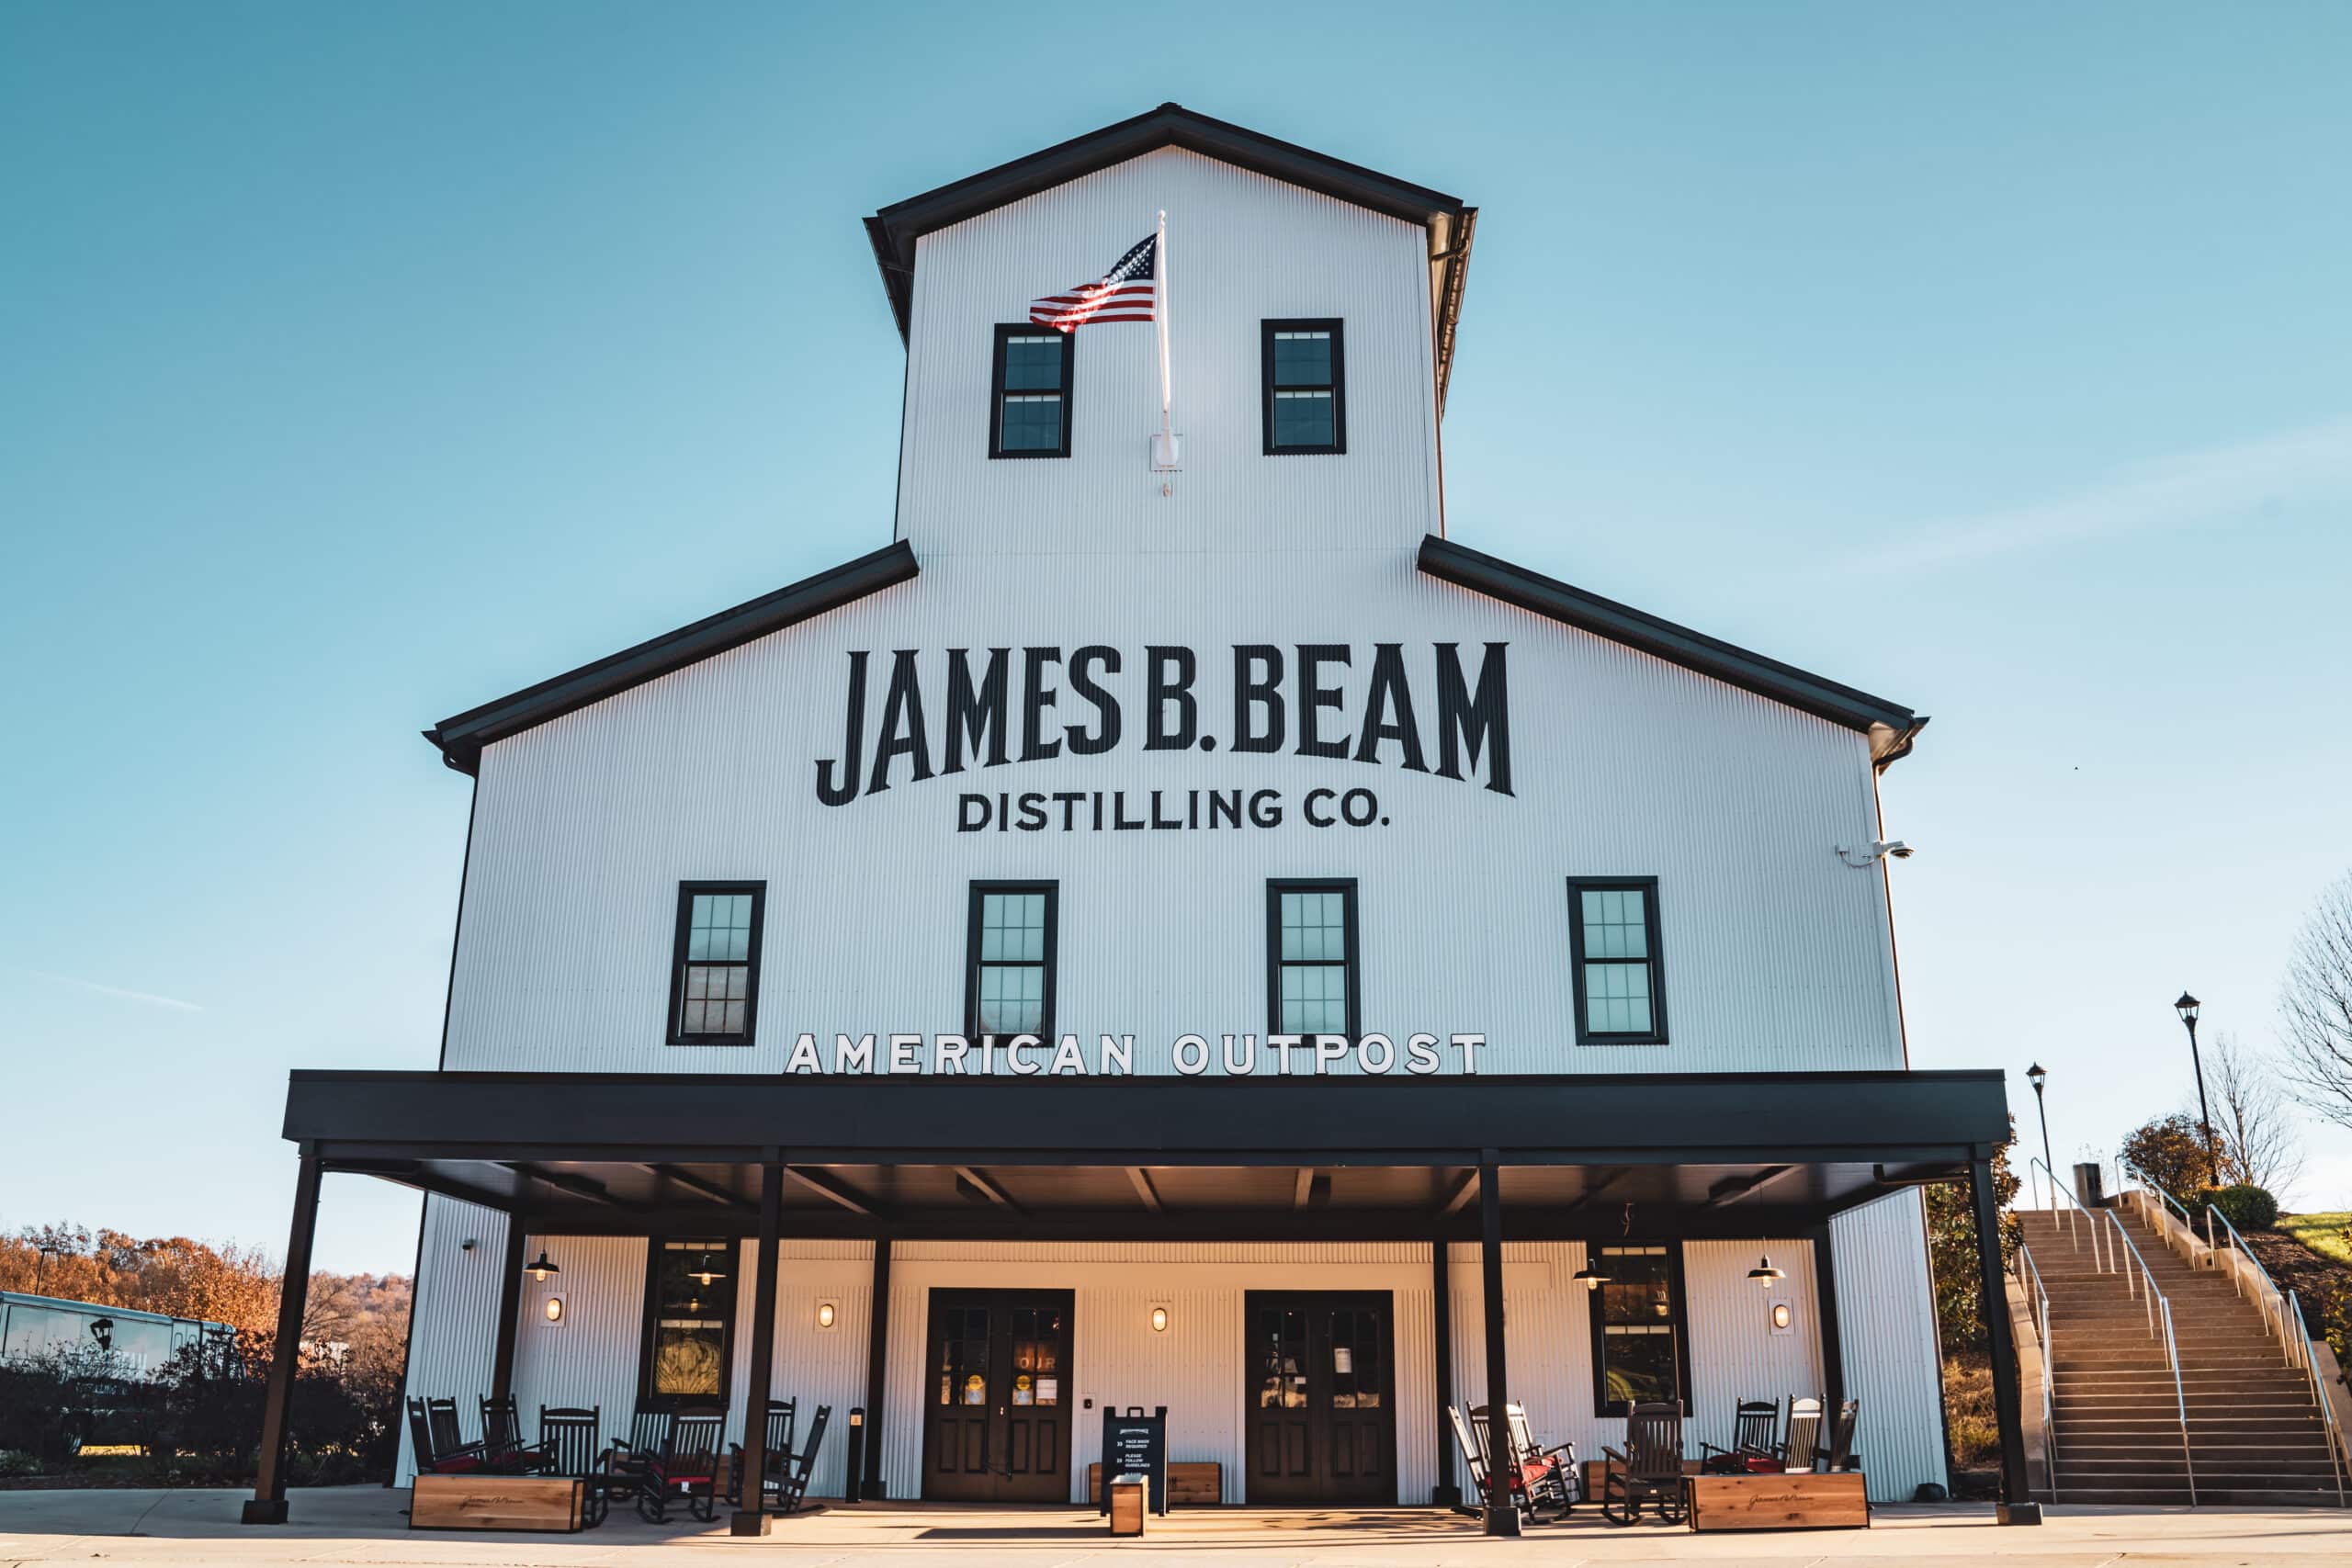 America Outpost at James B Beam Distilling Co